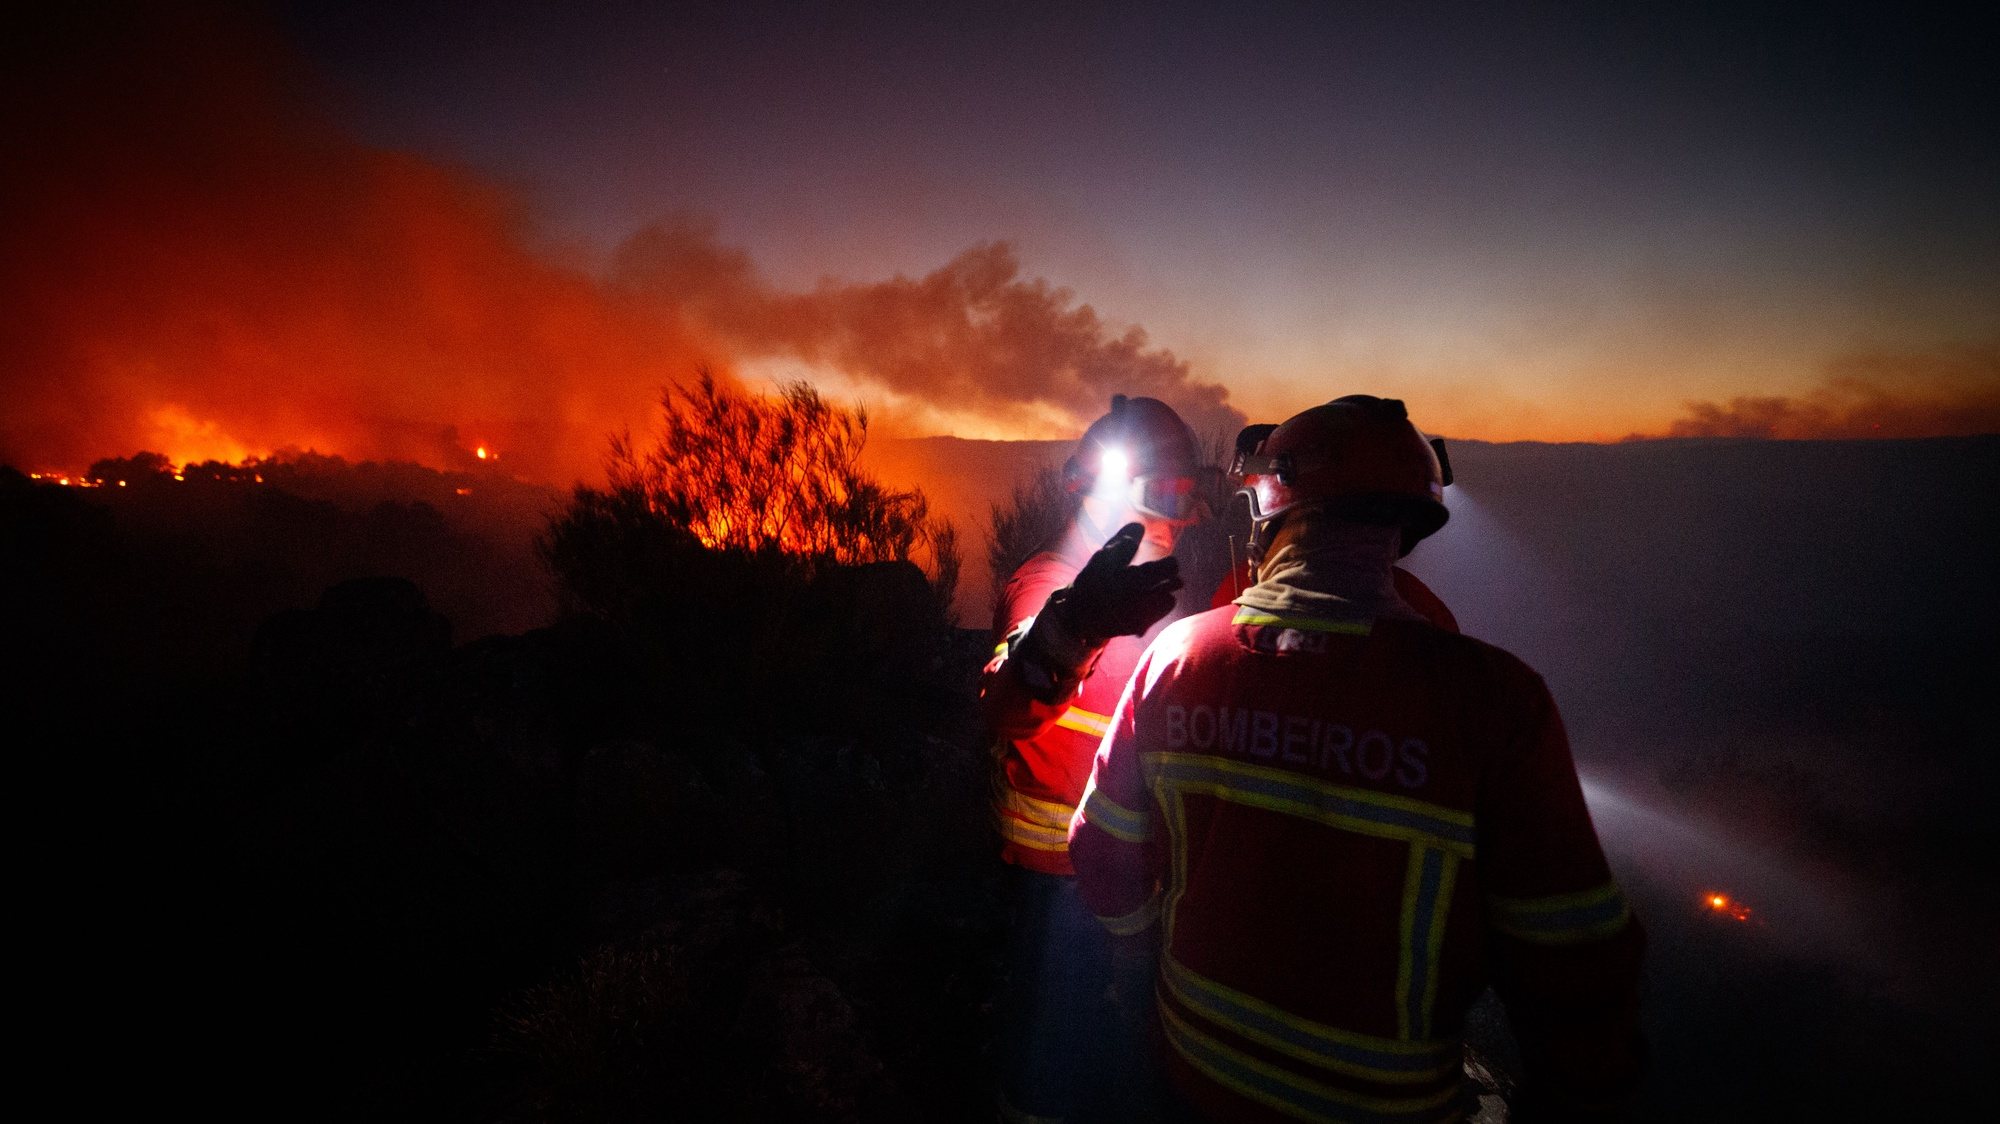 Firemen fights a forest fire in Reboredo village, Vila Pouca de Aguiar, Portugal, 28 July 2022. 466 operational, 144 vehicles and 06 airplane are fighting the forest fire. PEDRO SARMENTO COSTA/LUSA